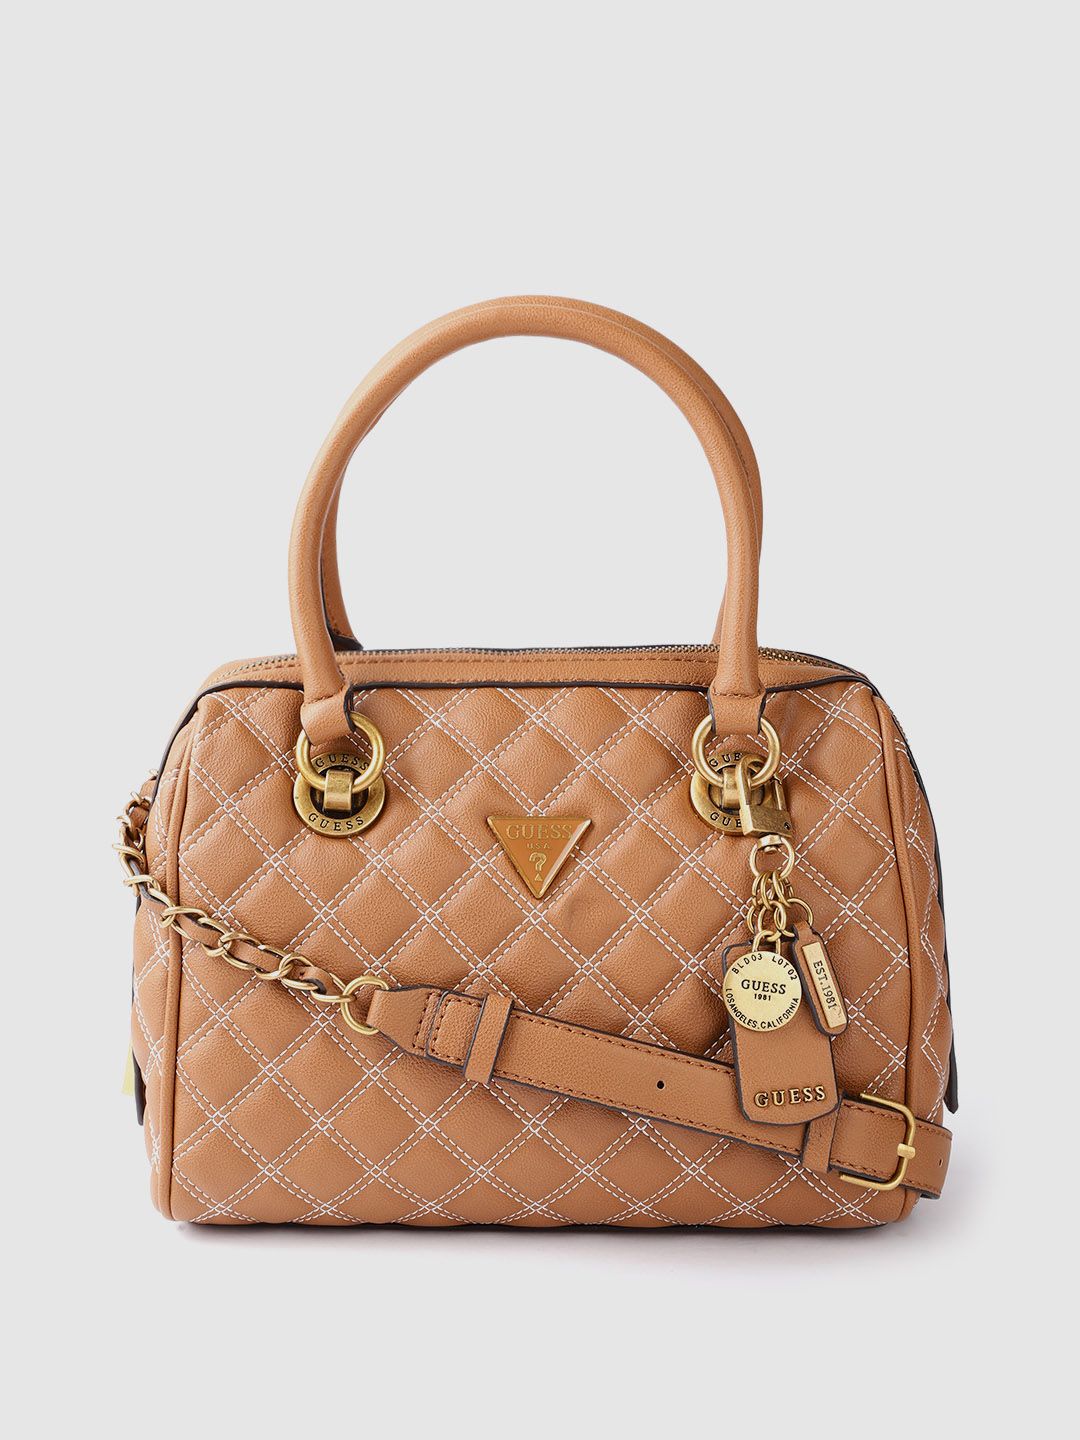 GUESS Women Tan Brown Quilted Structured Handheld Bag Price in India